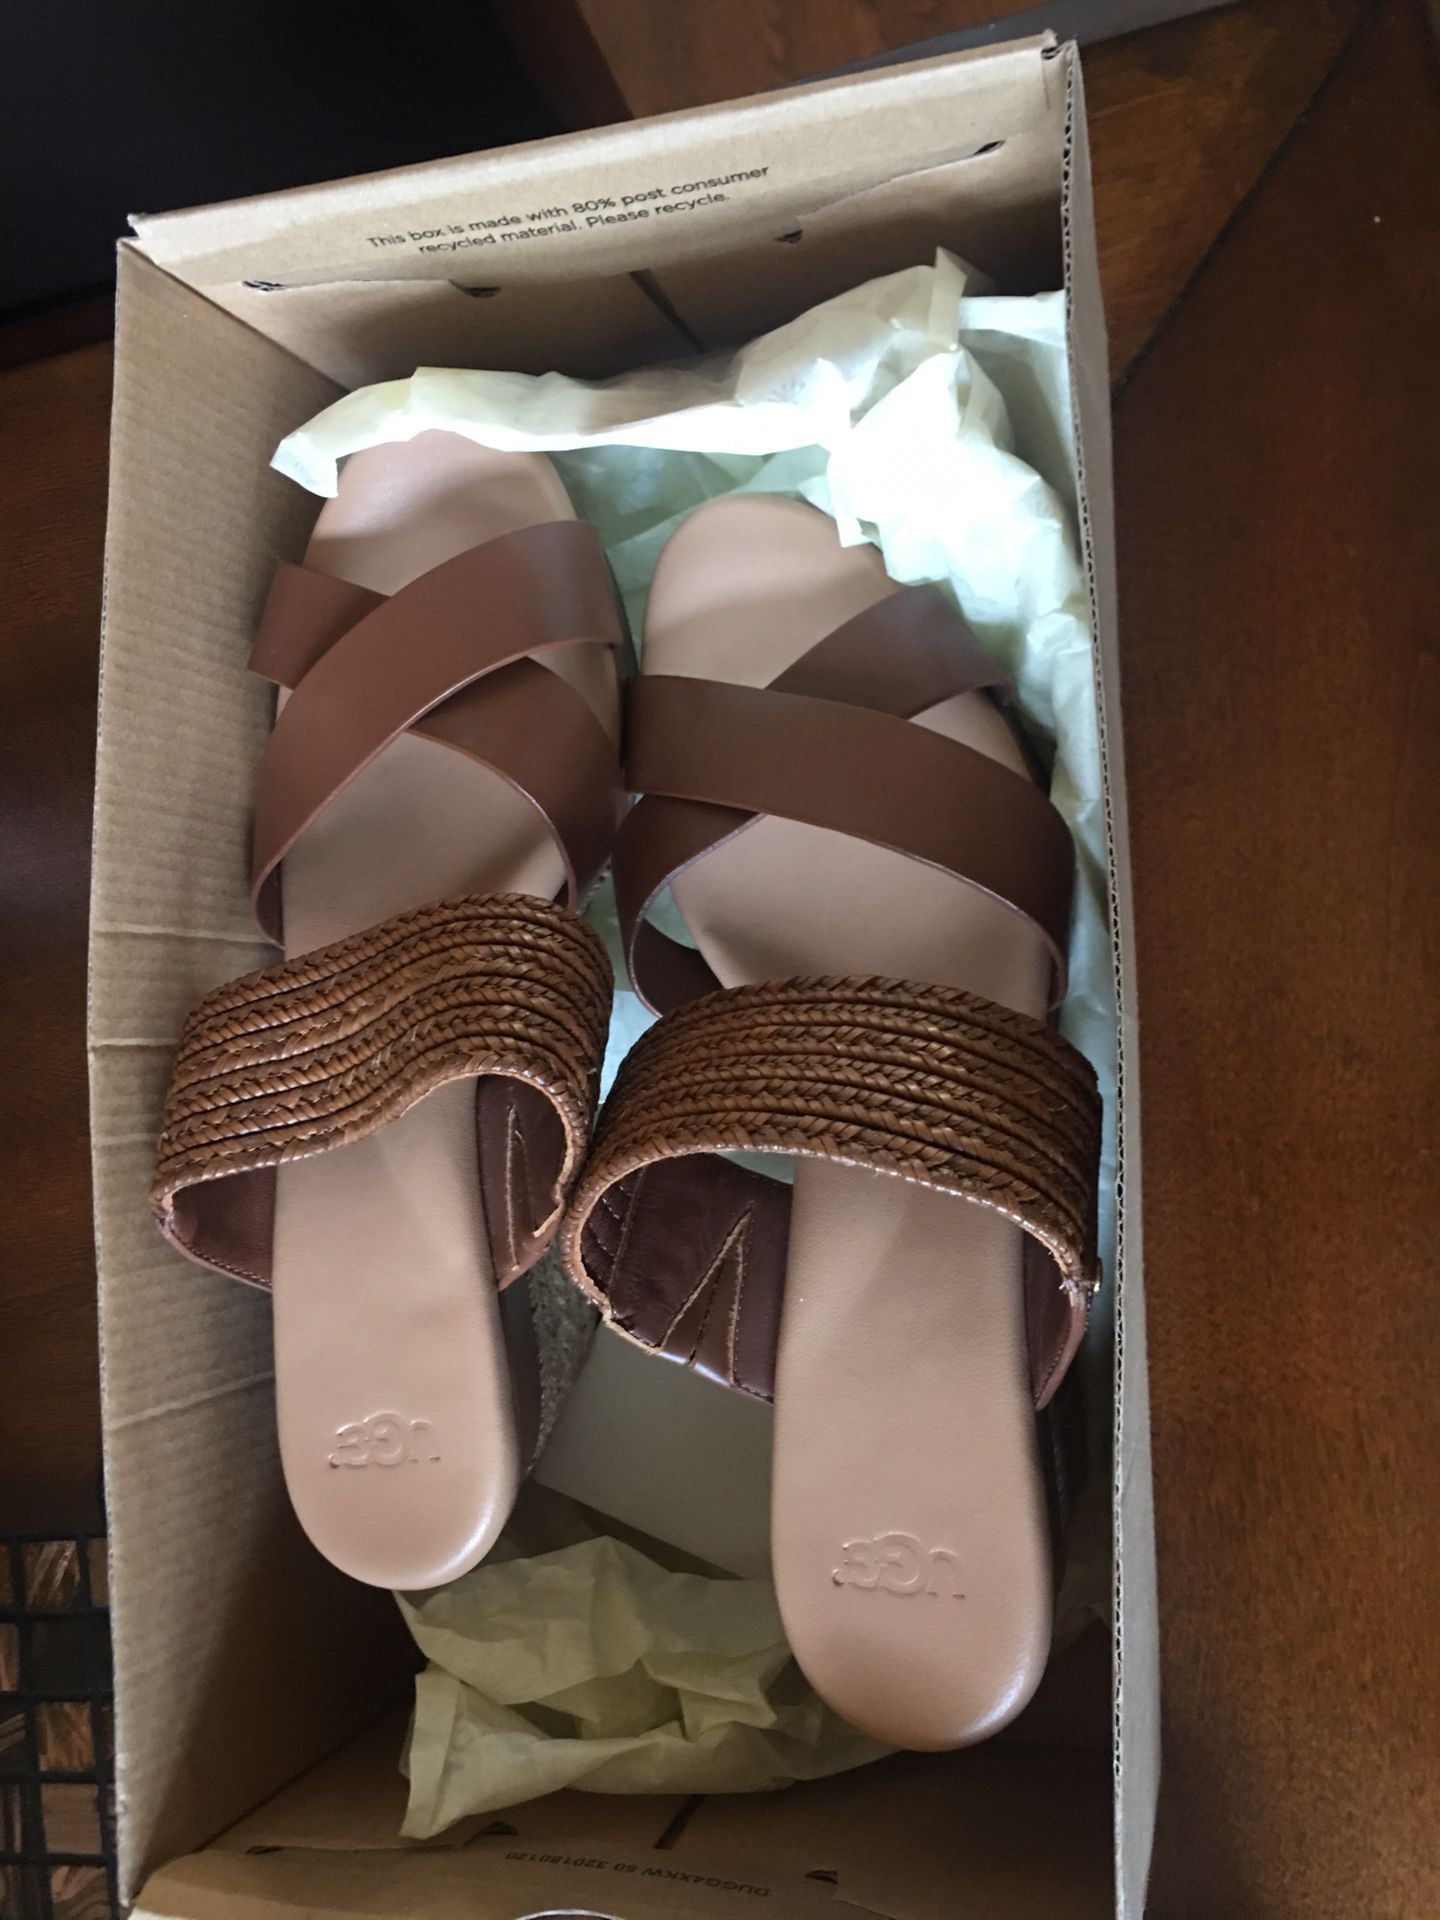 Ugg brand new wedges size 8 from Dillard’s original price is $125